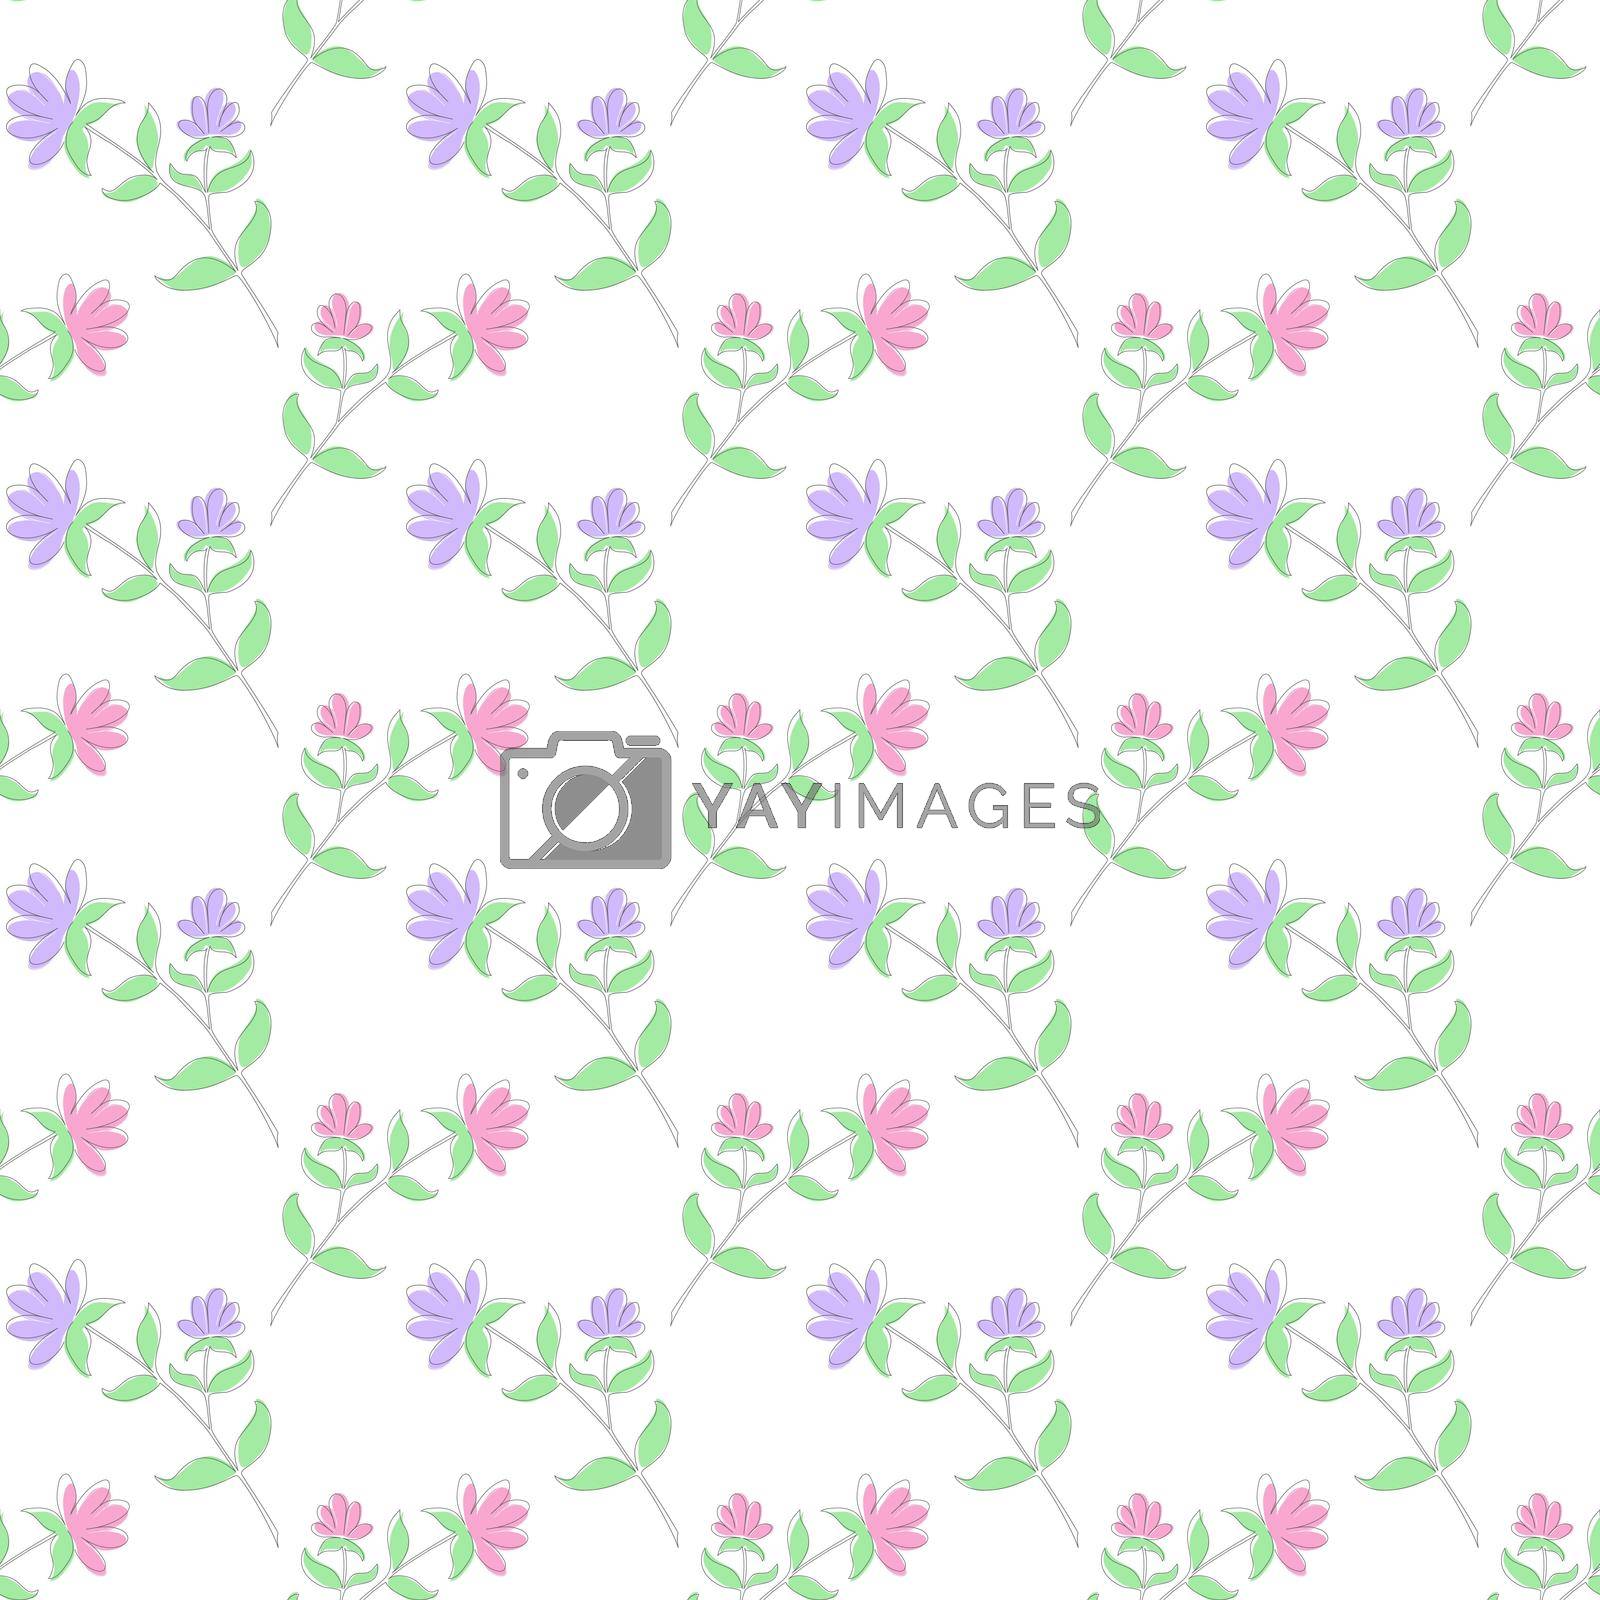 Floral seamless pattern for textures, textiles, packaging and simple backgrounds. Flat style.
